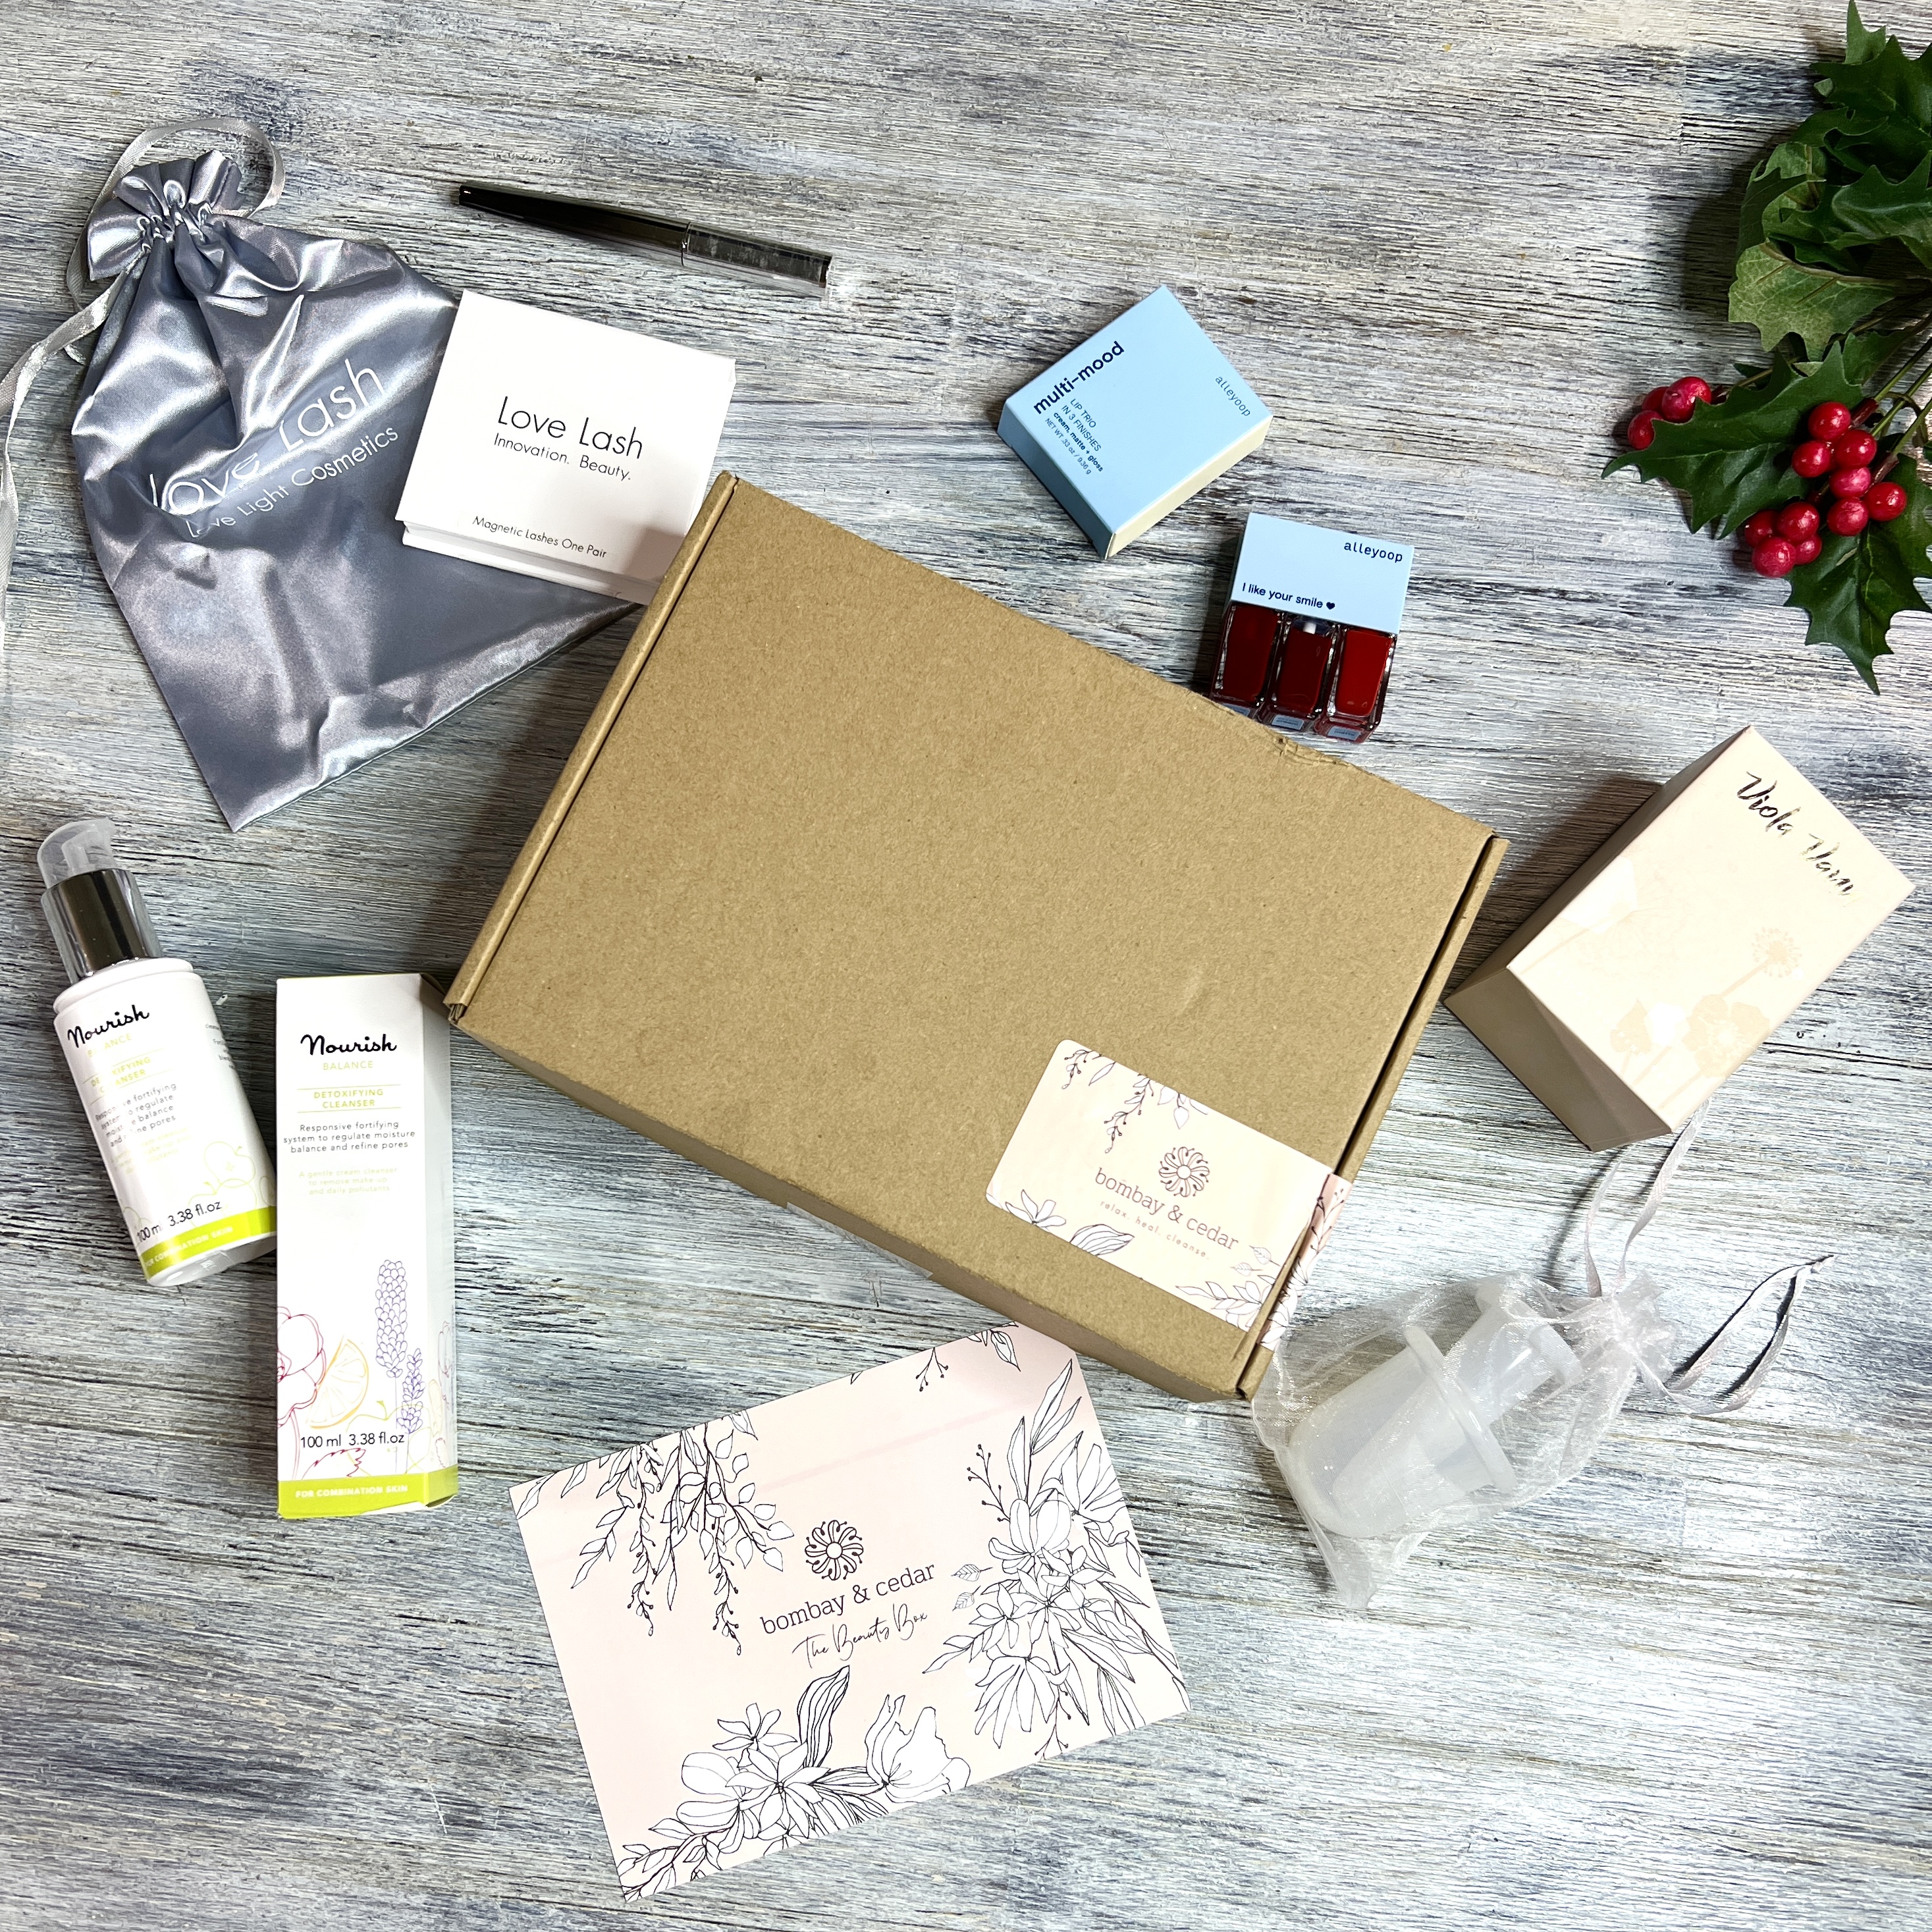 The Beauty Box by Bombay & Cedar “Fancy” Review + Coupon